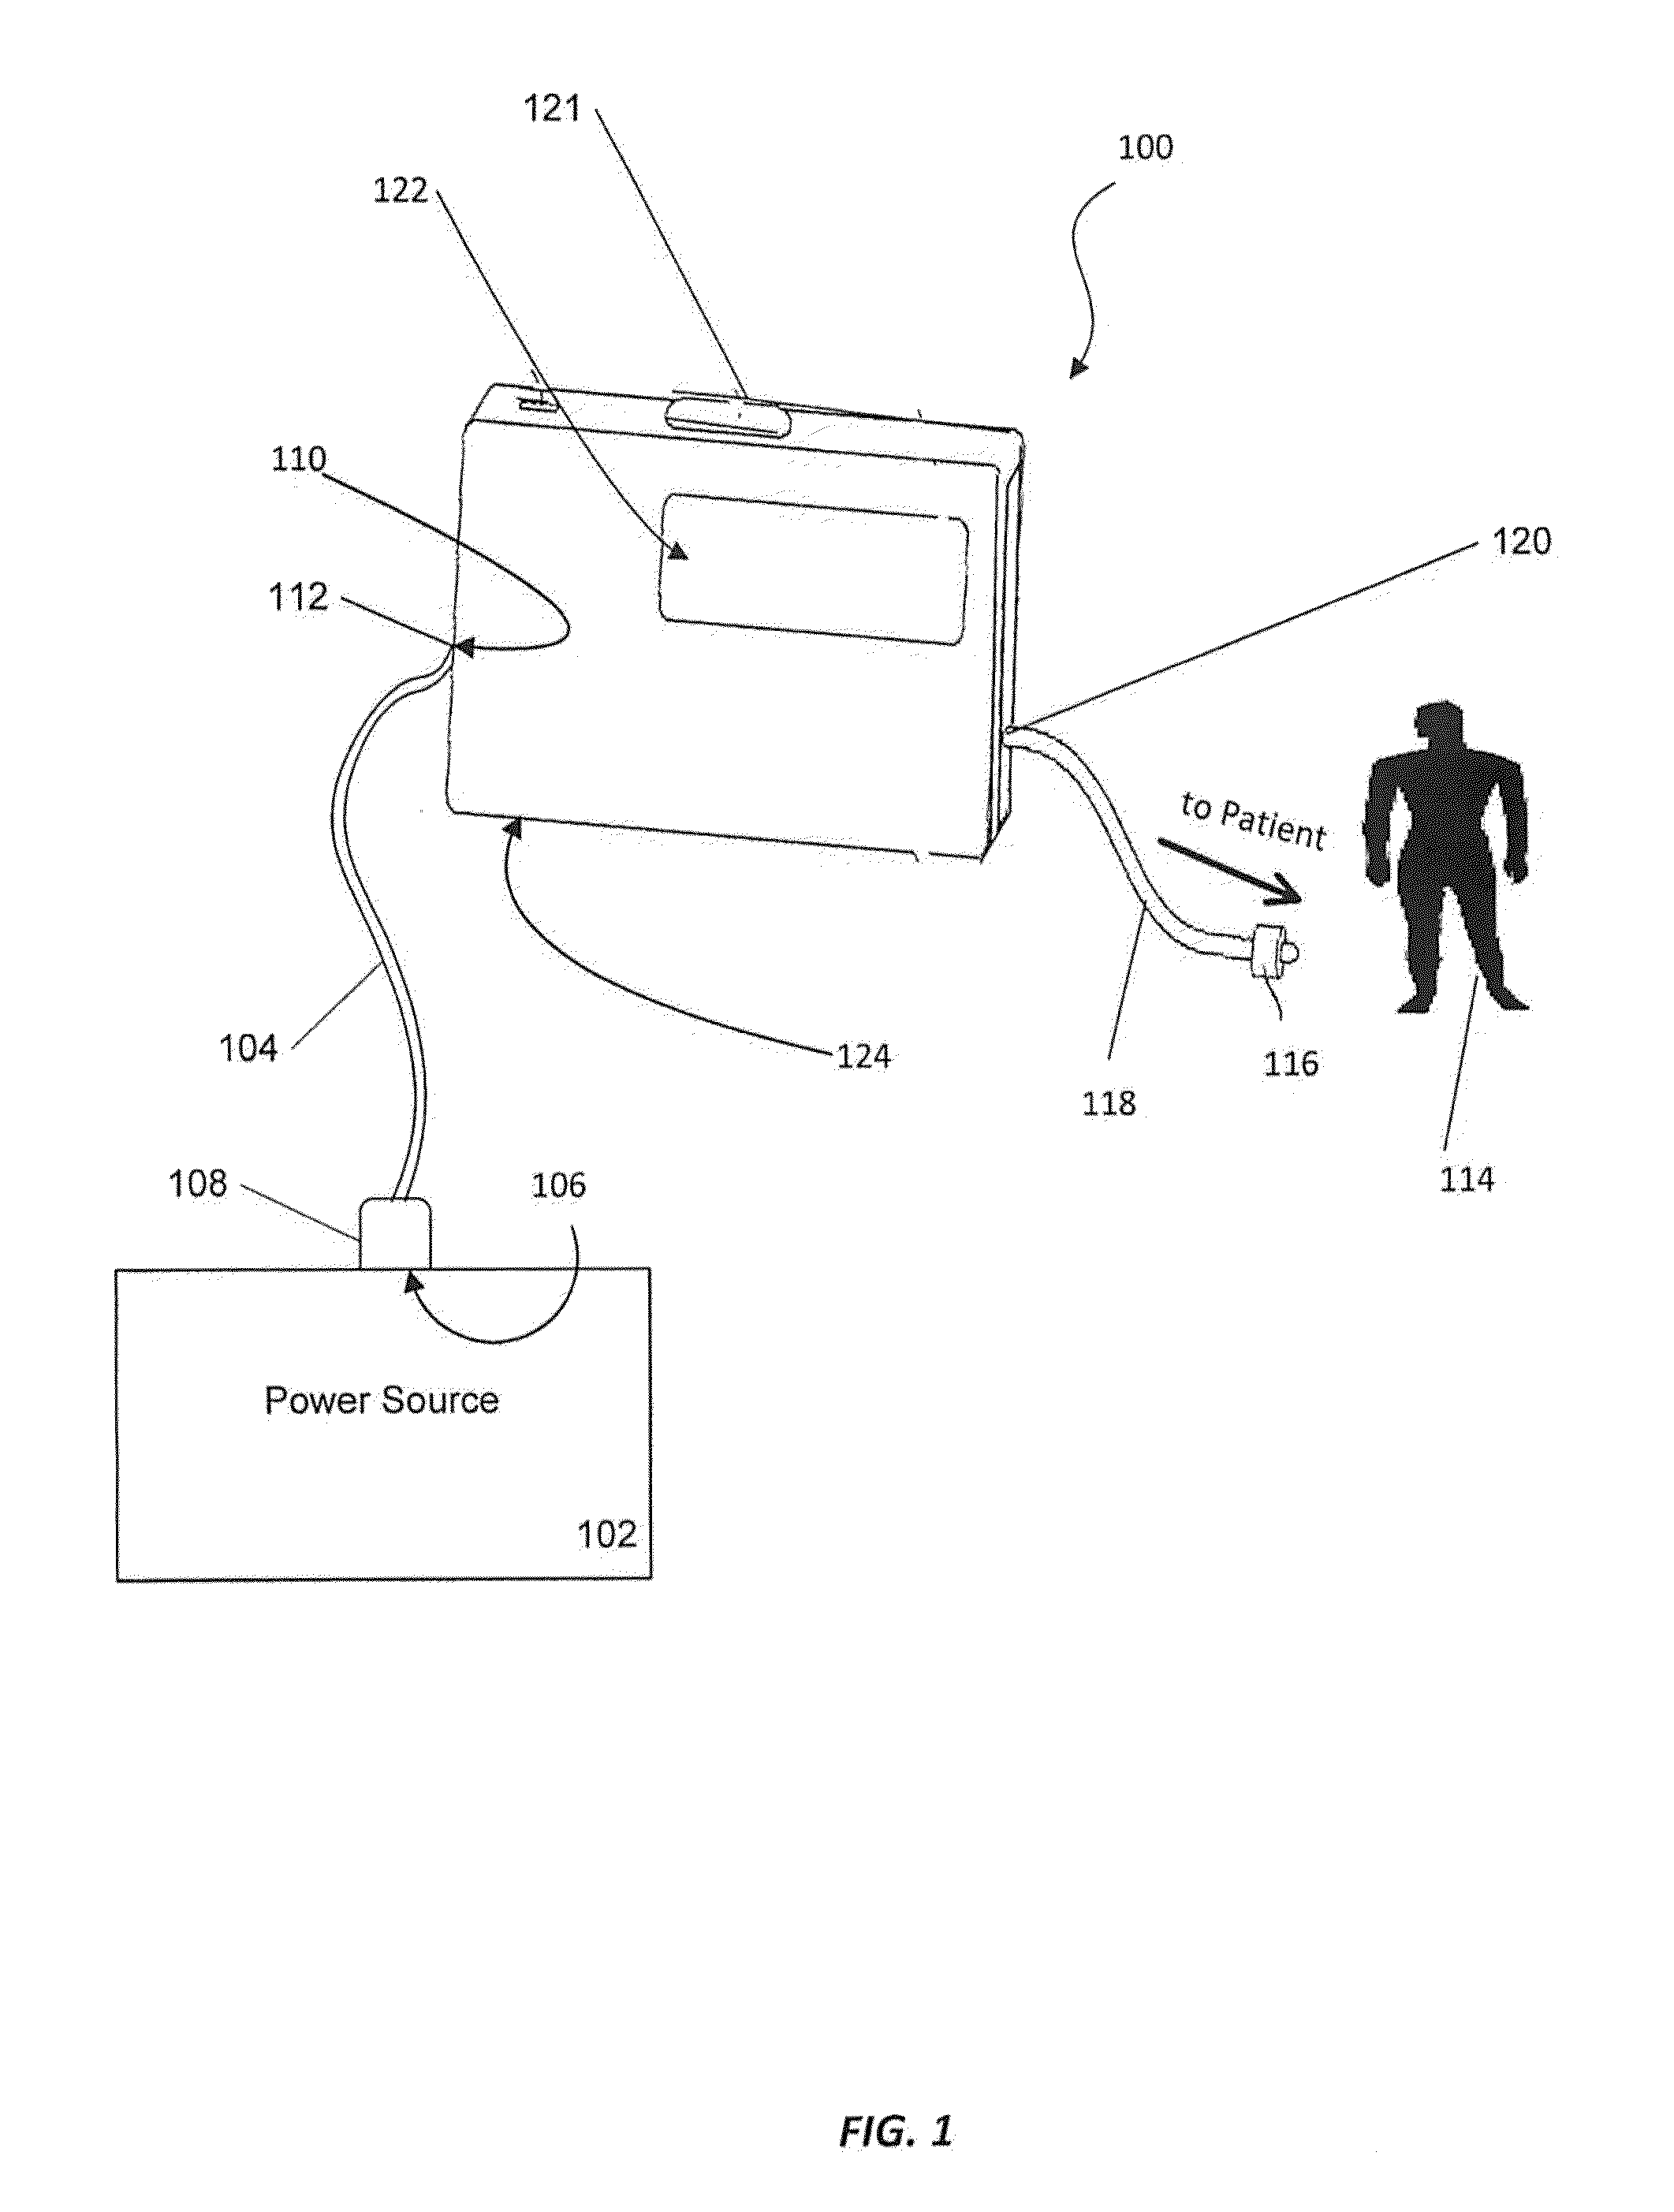 Sealed infusion device with electrical connector port